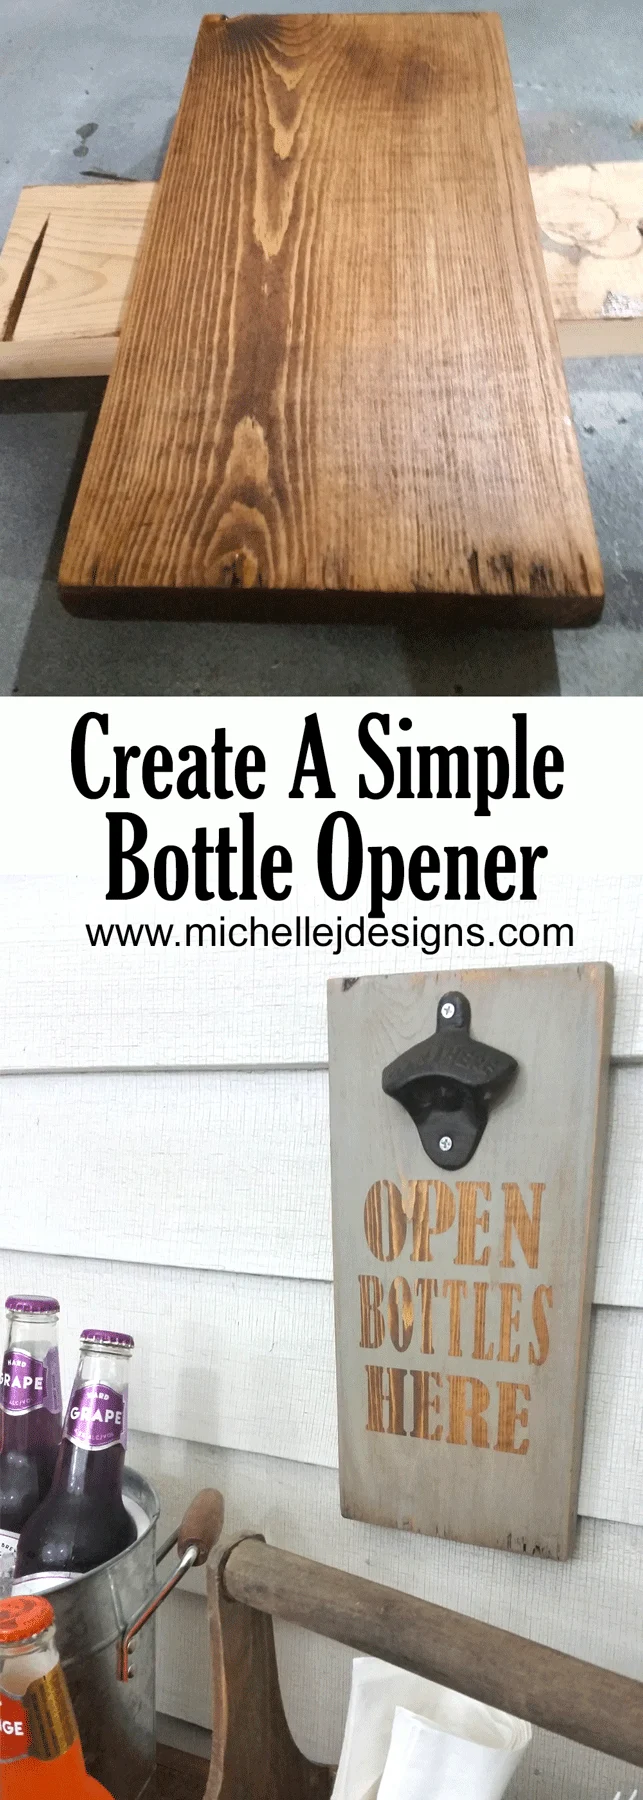 This bottle opener tutorial is really easy and will only take a day to complete! www.michellejdesigns.com